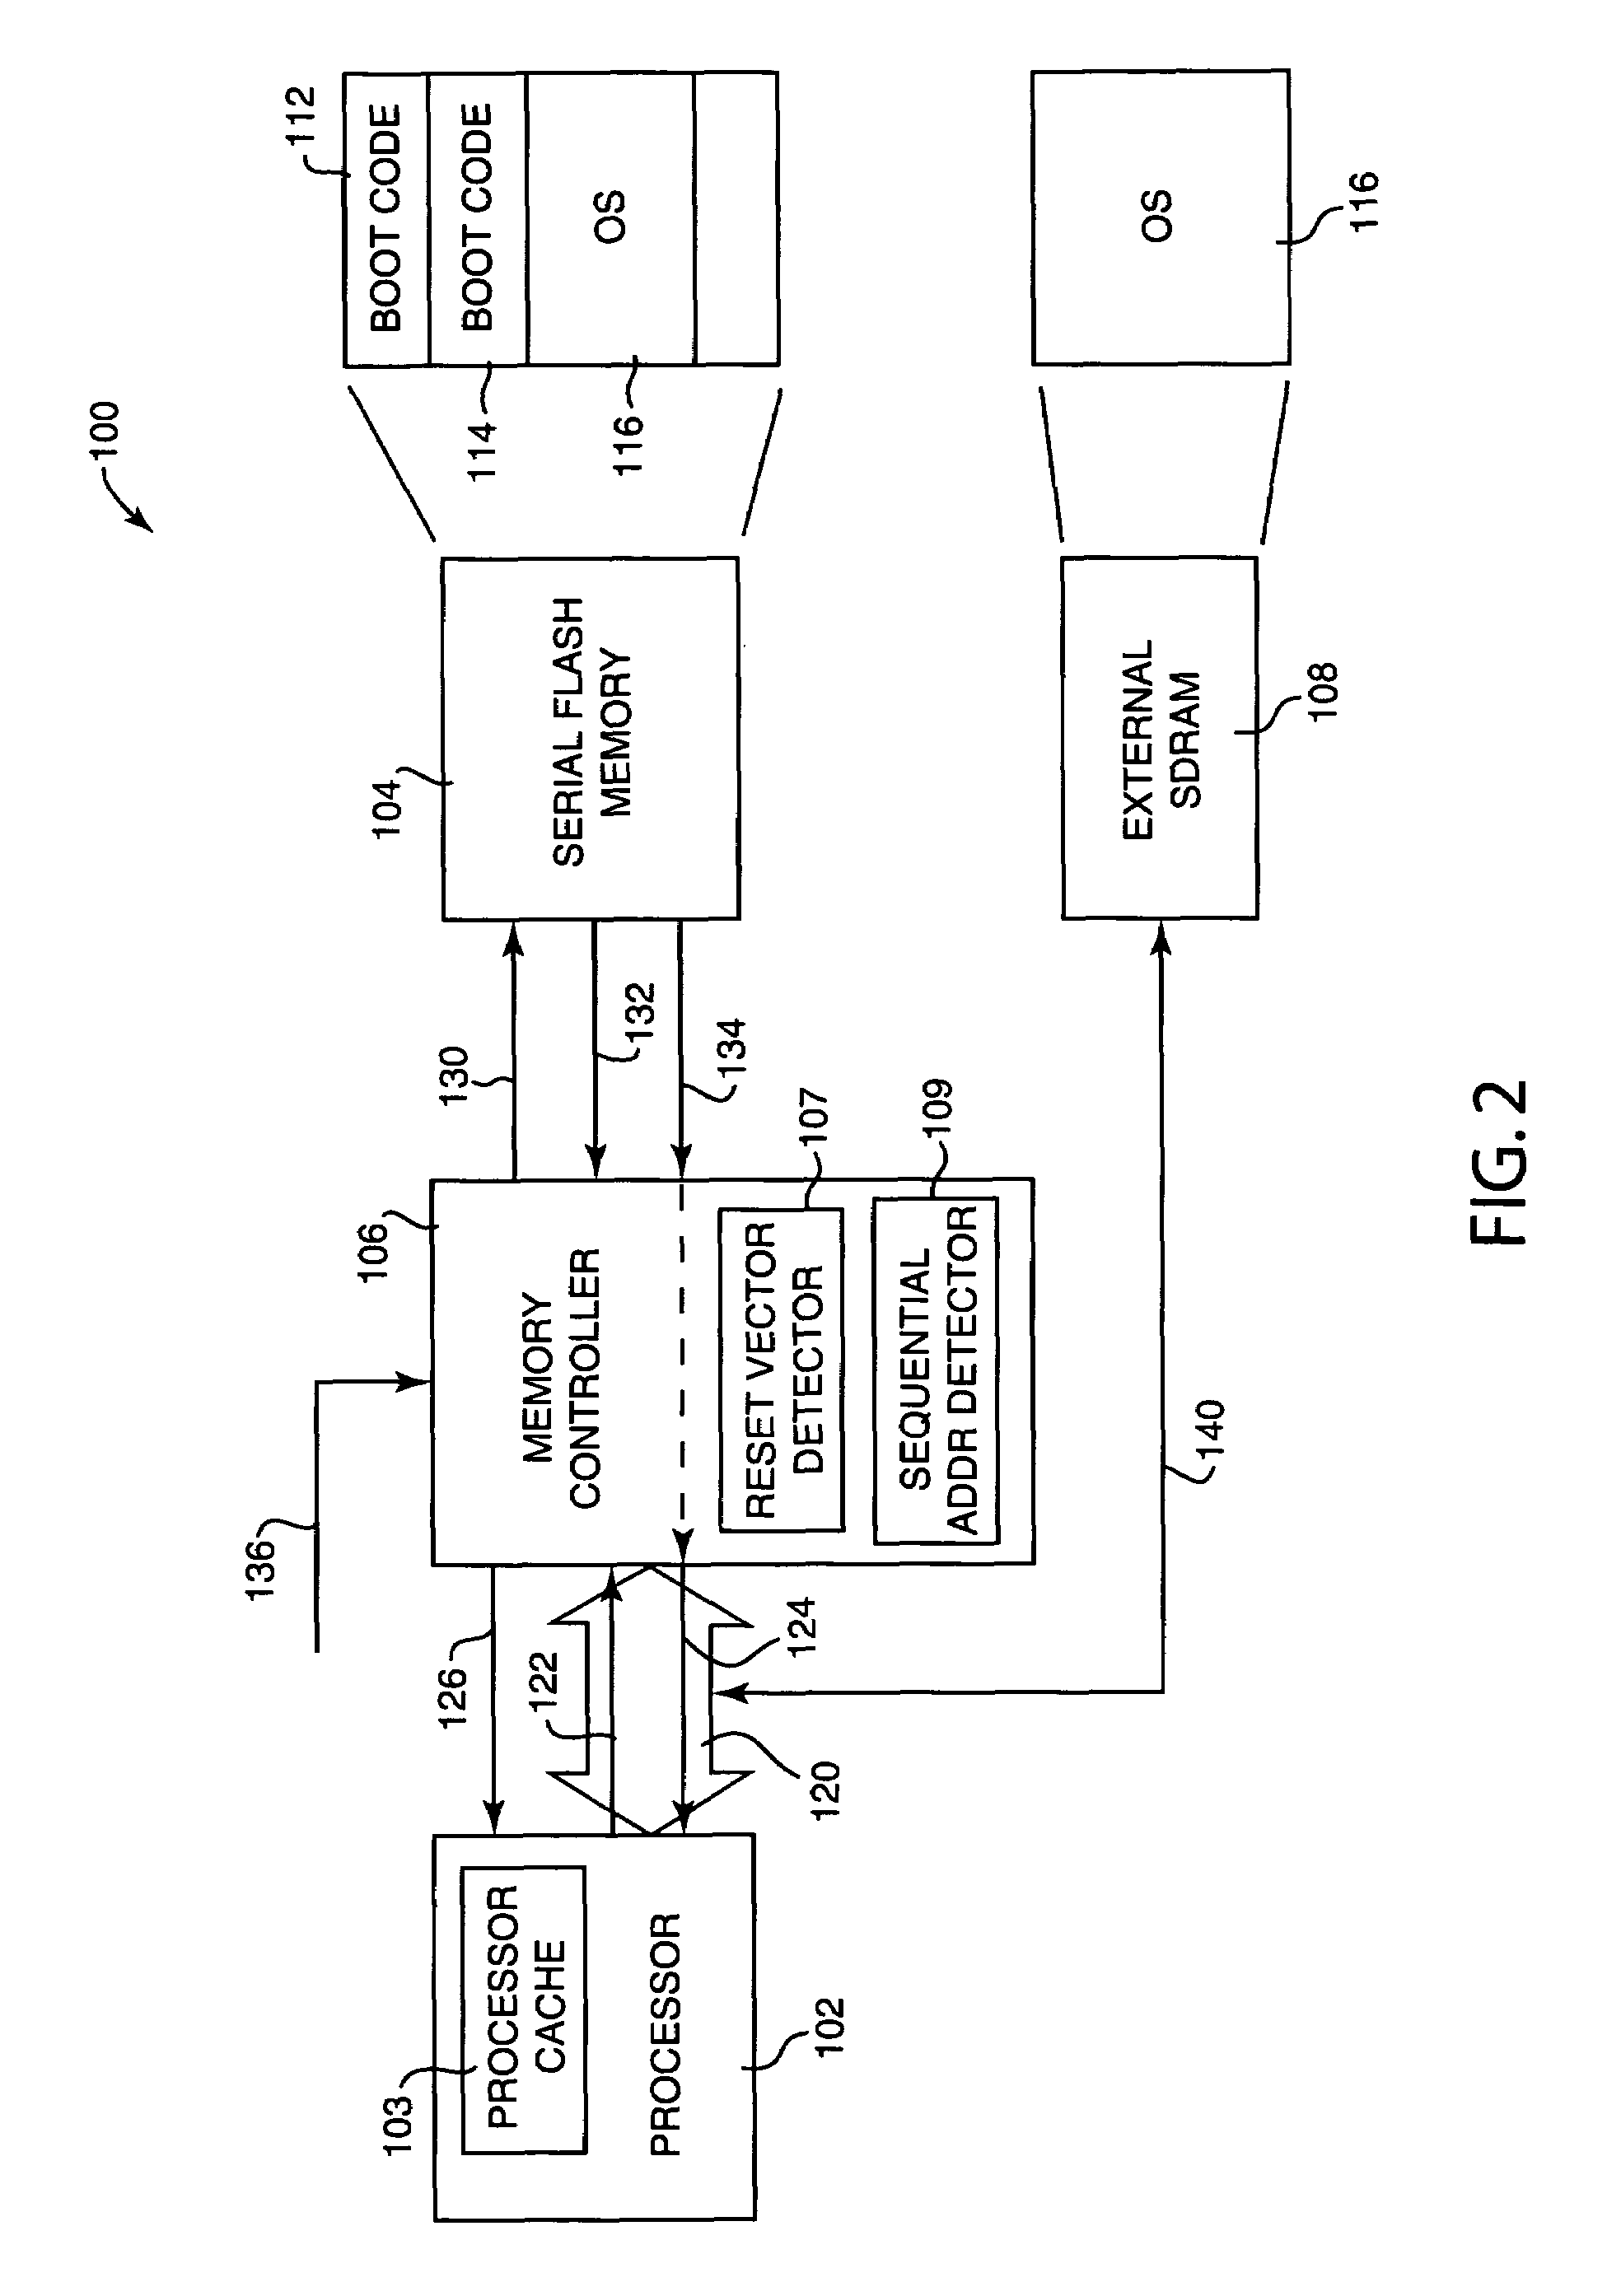 Method and system for loading processor boot code from serial flash memory